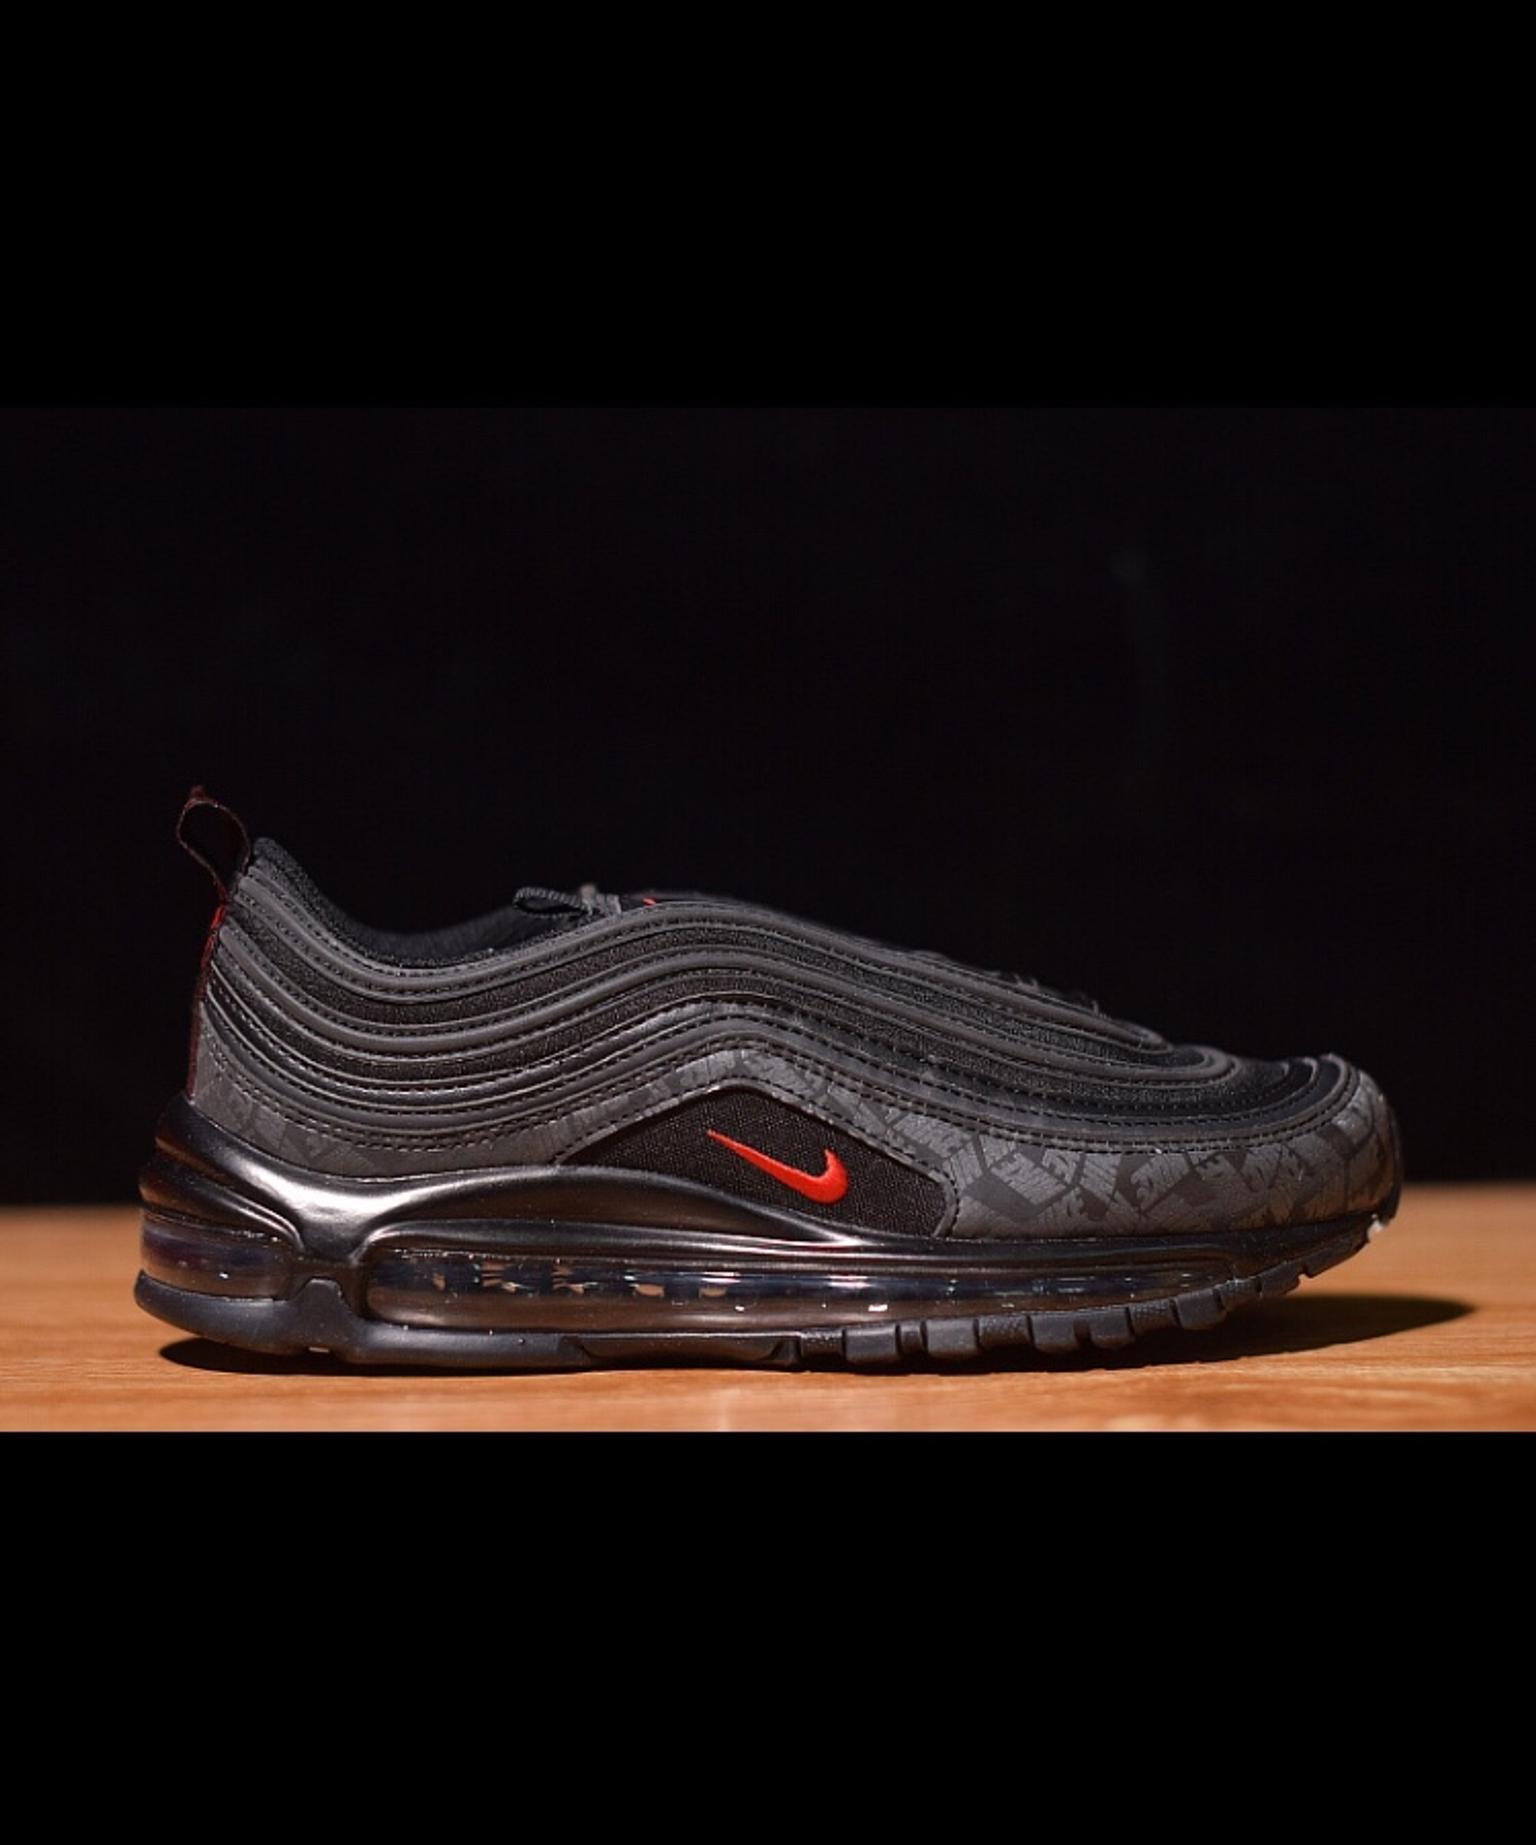 Nike Air Max 97 W chaussures or rouge marron Stylefile